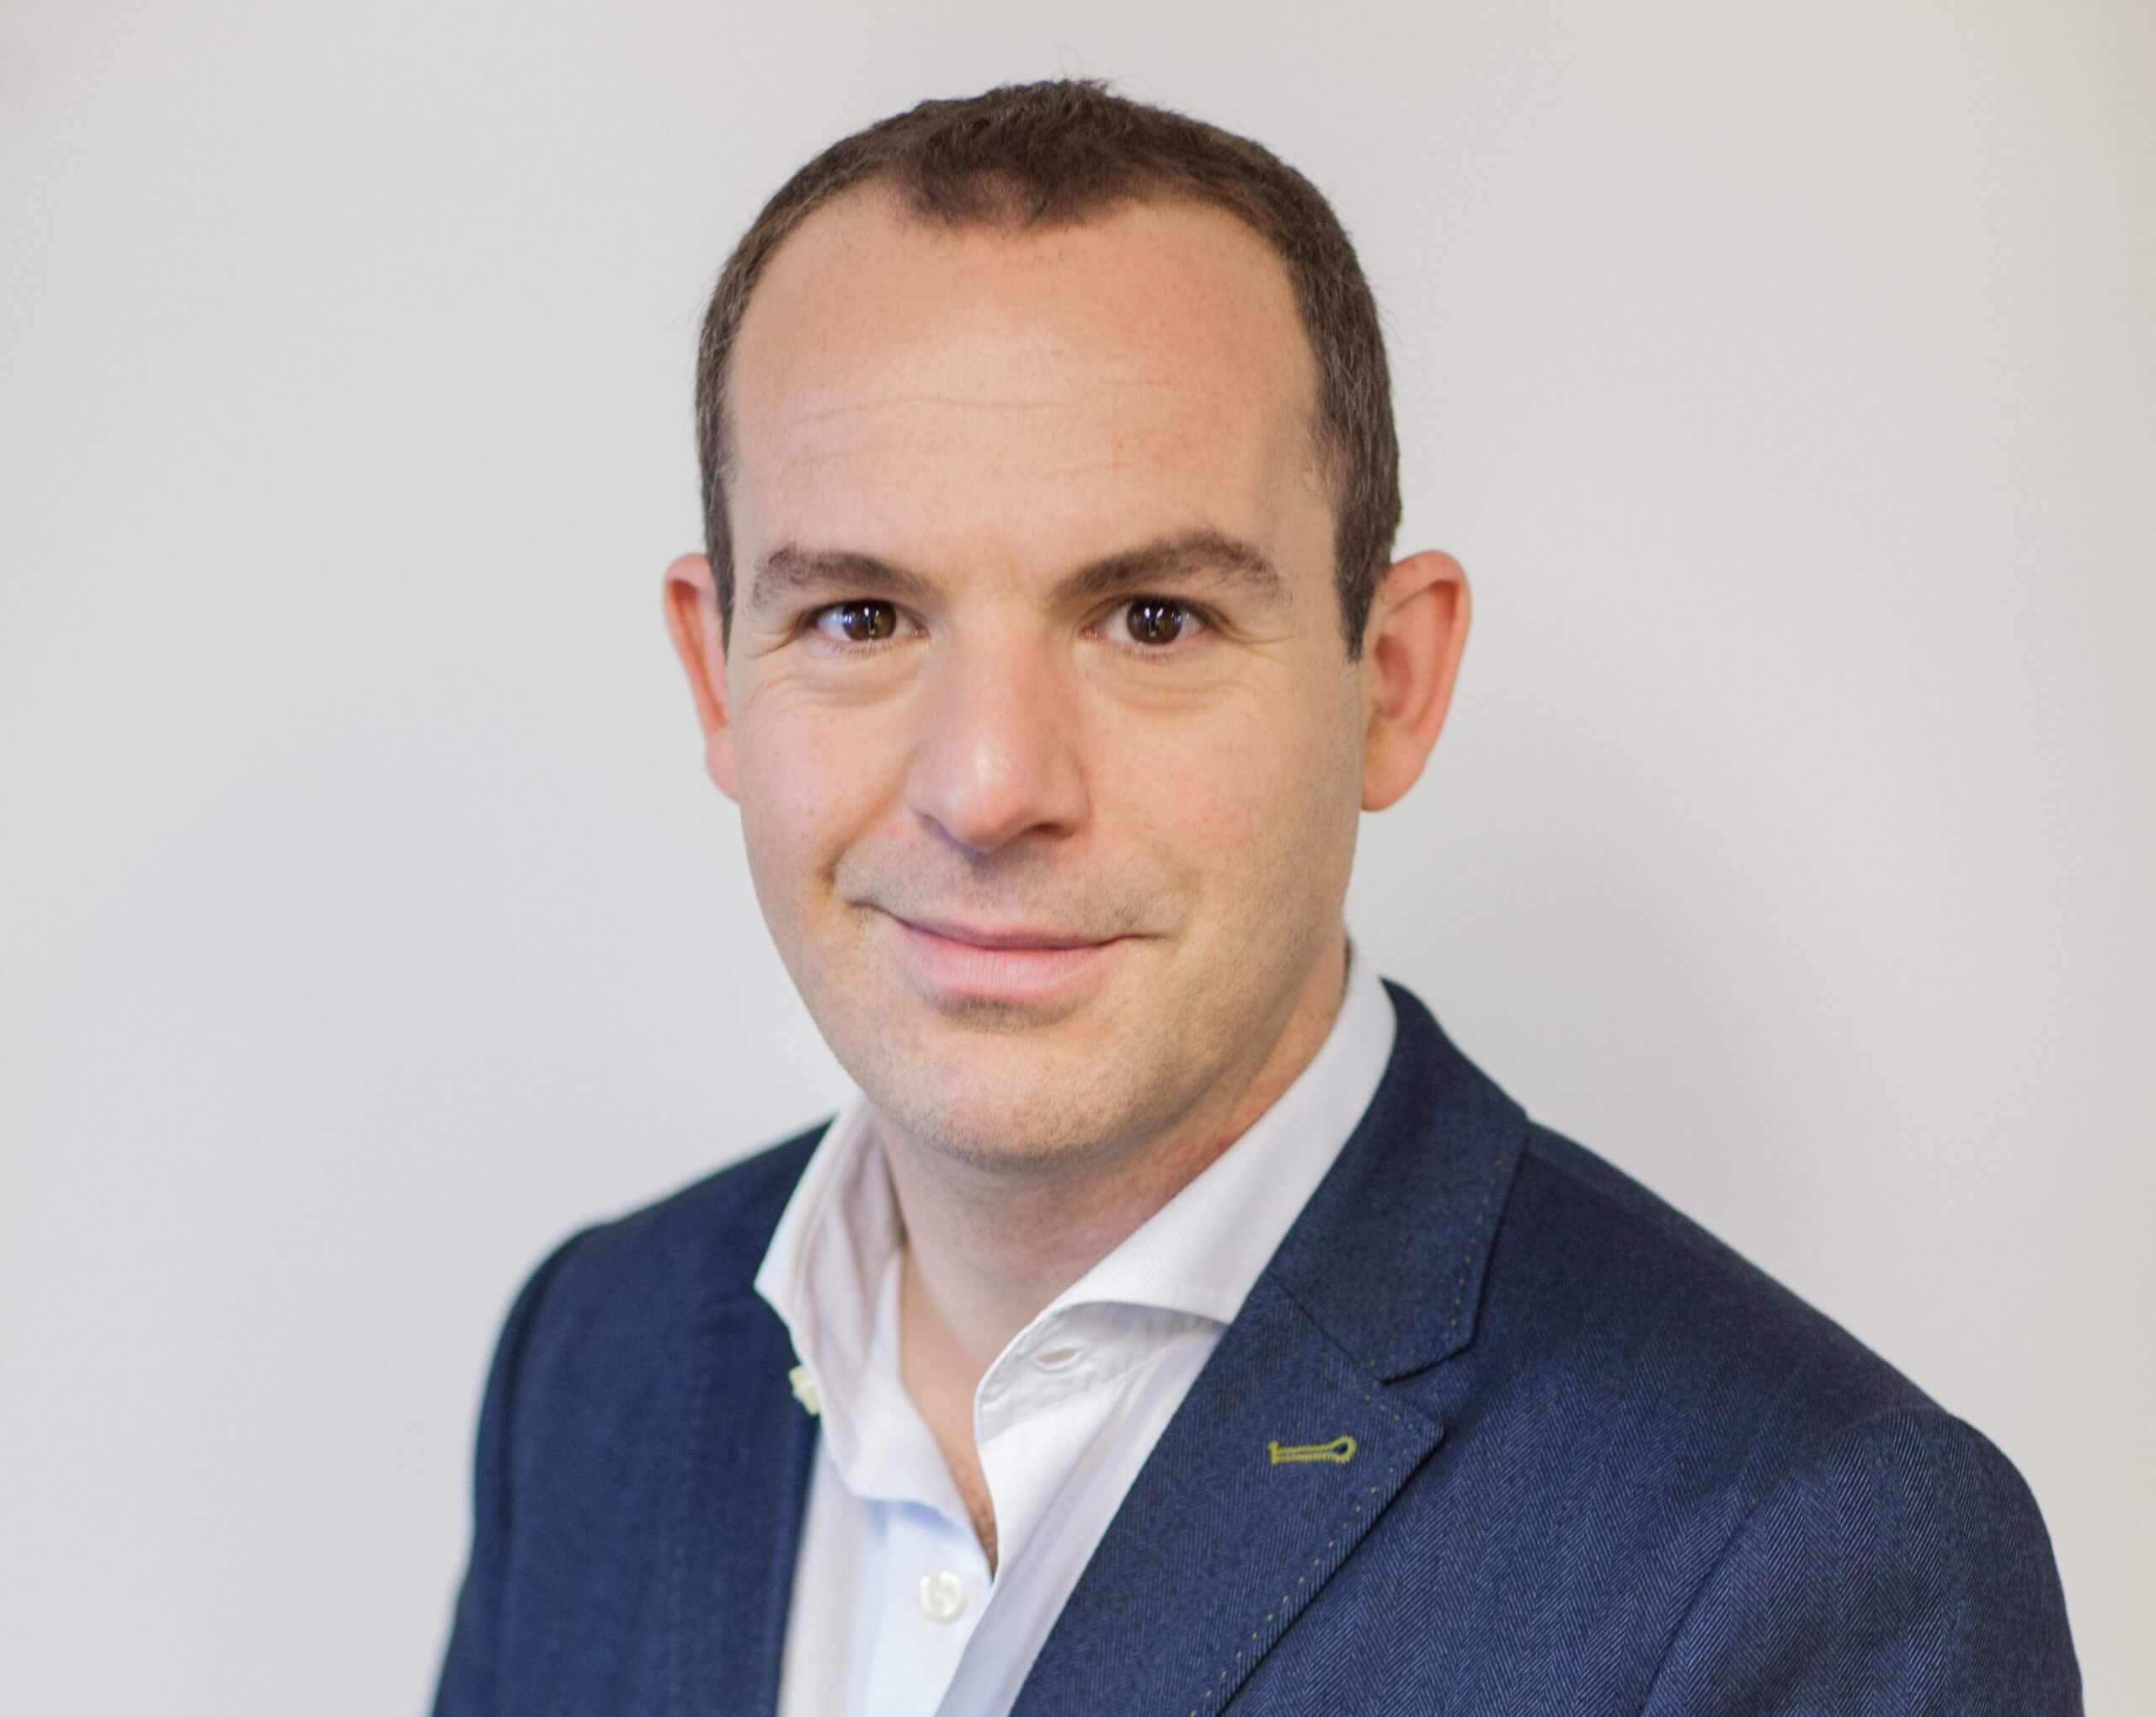 Online Safety Bill: Martin Lewis calls on MPs to include scam ads